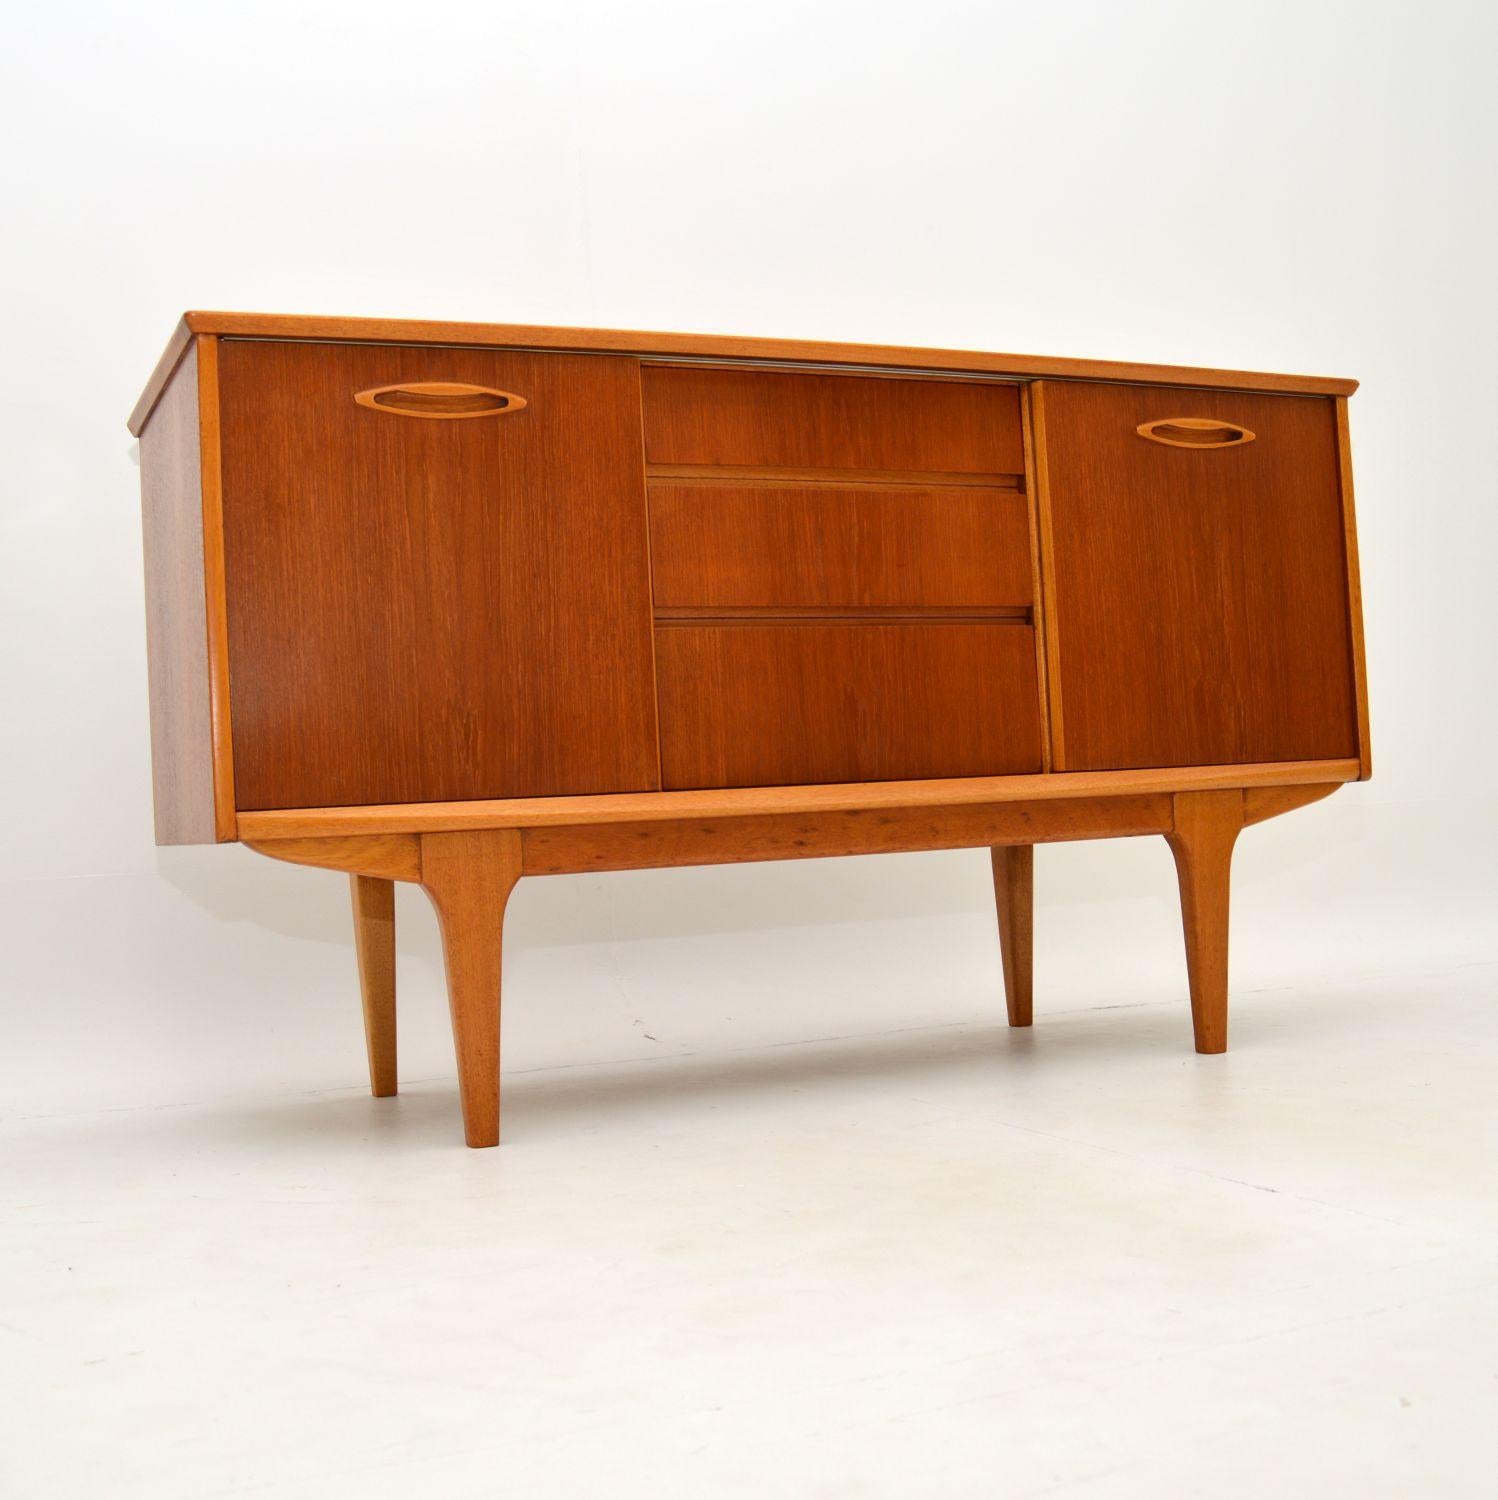 A wonderful vintage sideboard in teak. This was made in England by Jentique, it dates from the 1960’s.

This model is of excellent proportions, it is very compact, yet sleek and elegant. There are two sliding doors with shelves in the cupboards,